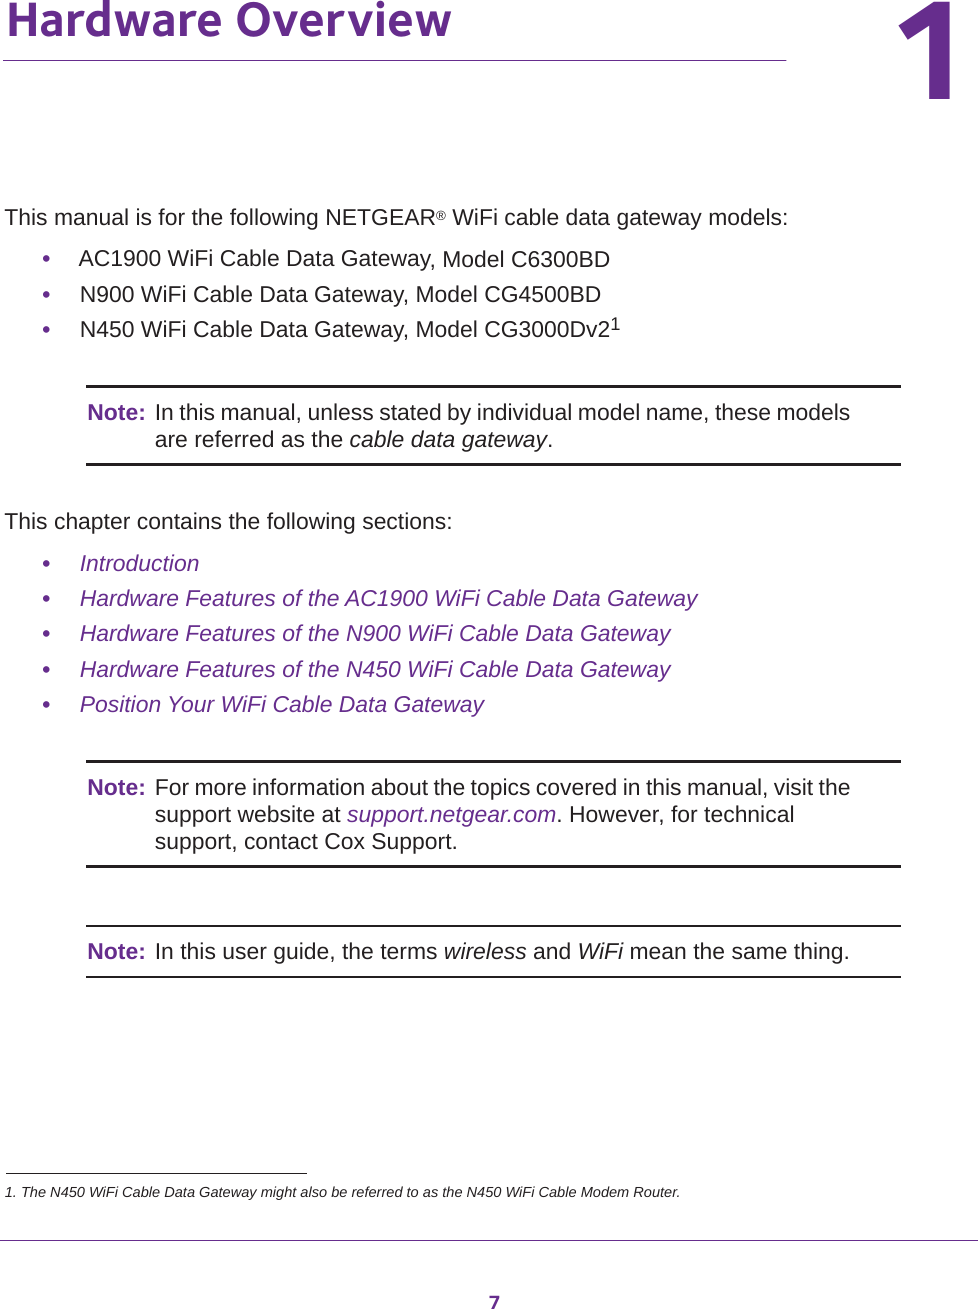 711.   Hardware OverviewThis manual is for the following NETGEAR® WiFi cable data gateway models:•AC1900 WiFi Cable Data Gateway, Model C6300BD•N900 WiFi Cable Data Gateway, Model CG4500BD•N450 WiFi Cable Data Gateway, Model CG3000Dv21Note: In this manual, unless stated by individual model name, these models are referred as the cable data gateway.This chapter contains the following sections:•Introduction•Hardware Features of the AC1900 WiFi Cable Data Gateway•Hardware Features of the N900 WiFi Cable Data Gateway•Hardware Features of the N450 WiFi Cable Data Gateway•Position Your WiFi Cable Data GatewayNote: For more information about the topics covered in this manual, visit the support website at support.netgear.com. However, for technical support, contact Cox Support.Note: In this user guide, the terms wireless and WiFi mean the same thing.1. The N450 WiFi Cable Data Gateway might also be referred to as the N450 WiFi Cable Modem Router.